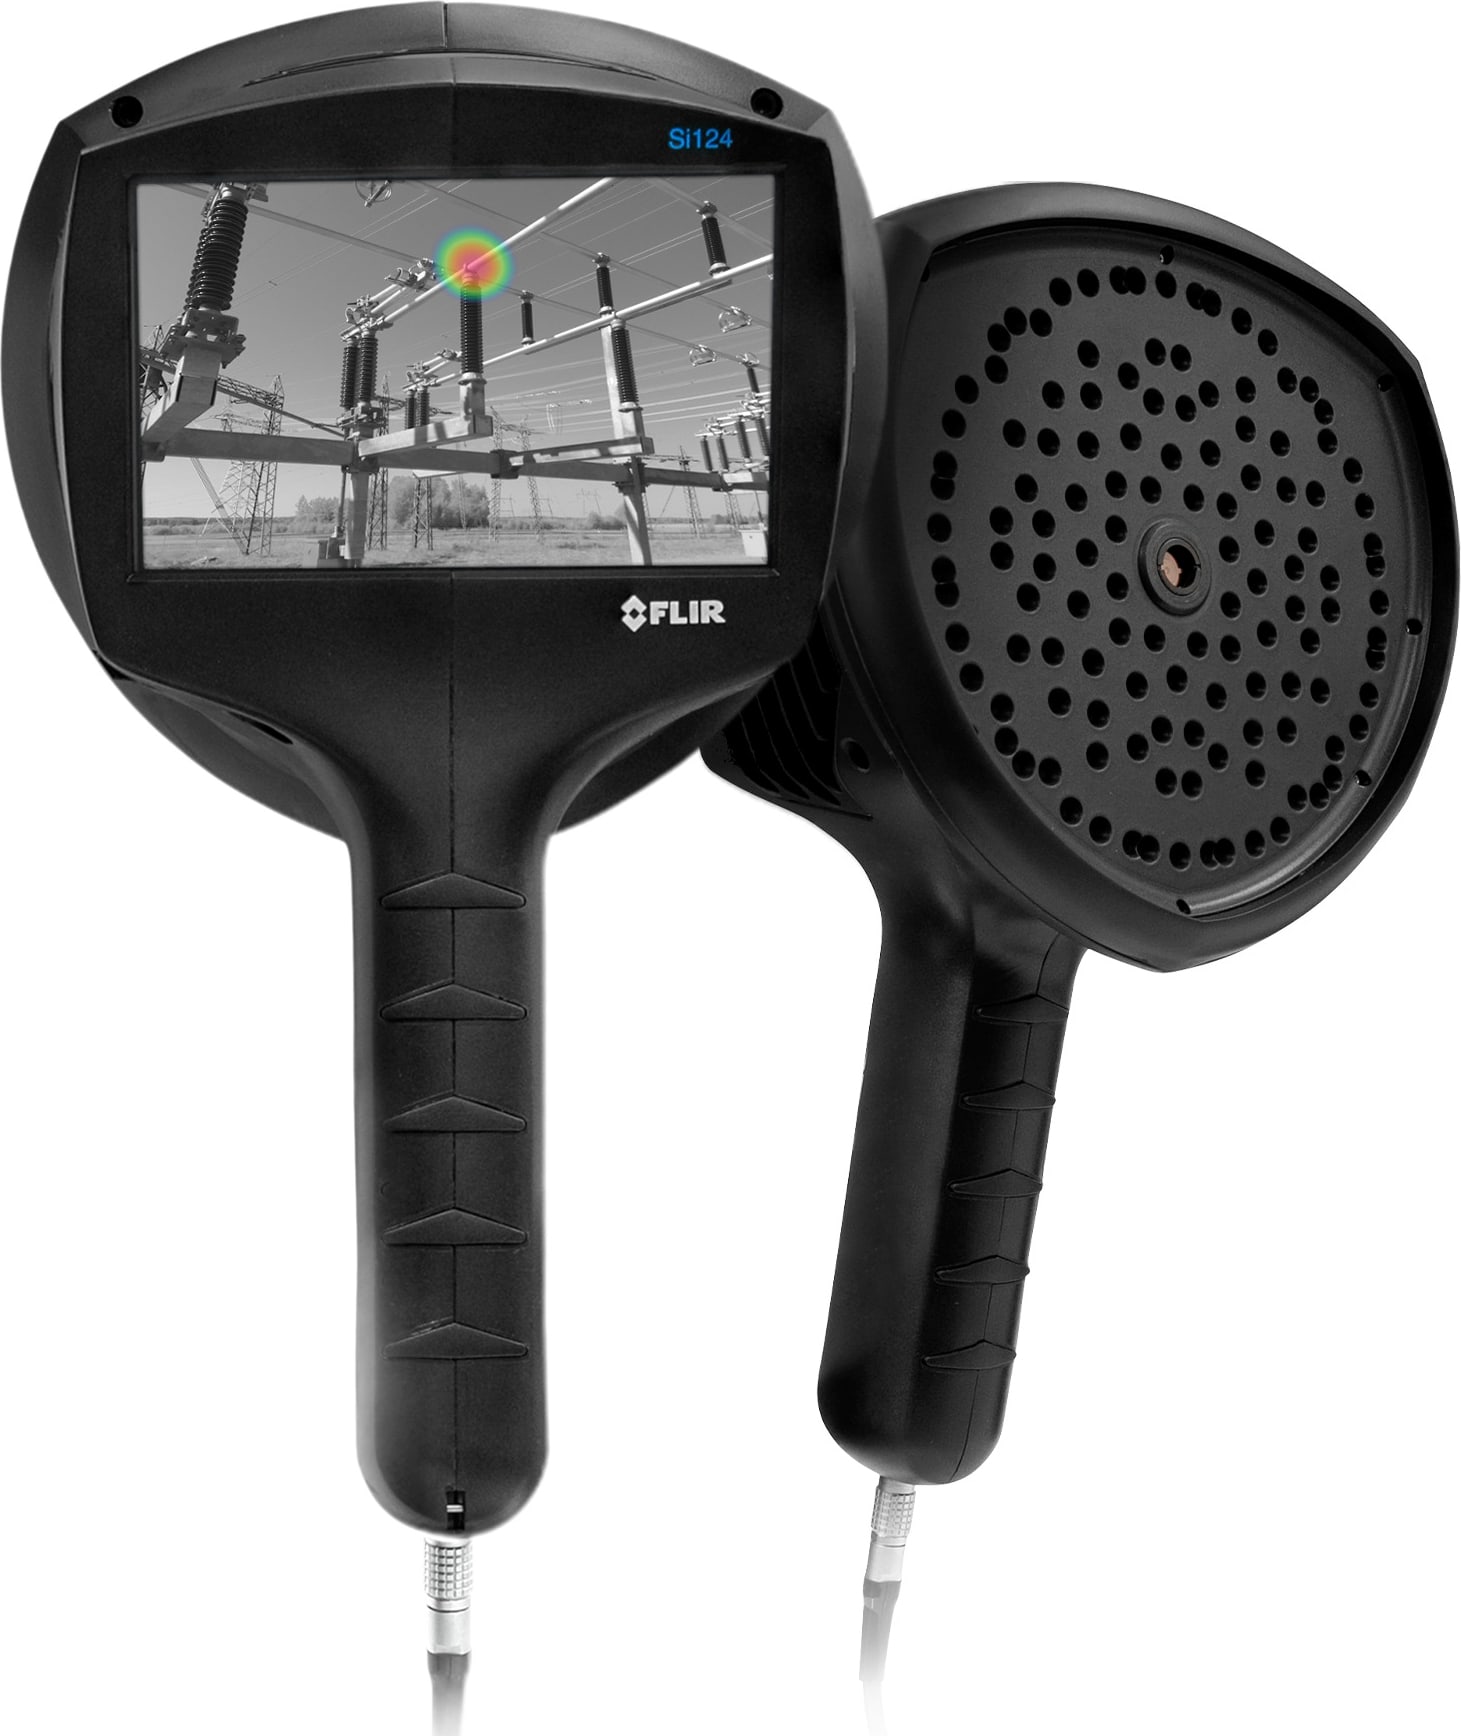 FLIR Si124-PD - Industrial Acoustic Imaging Camera for Partial Discharge Detection